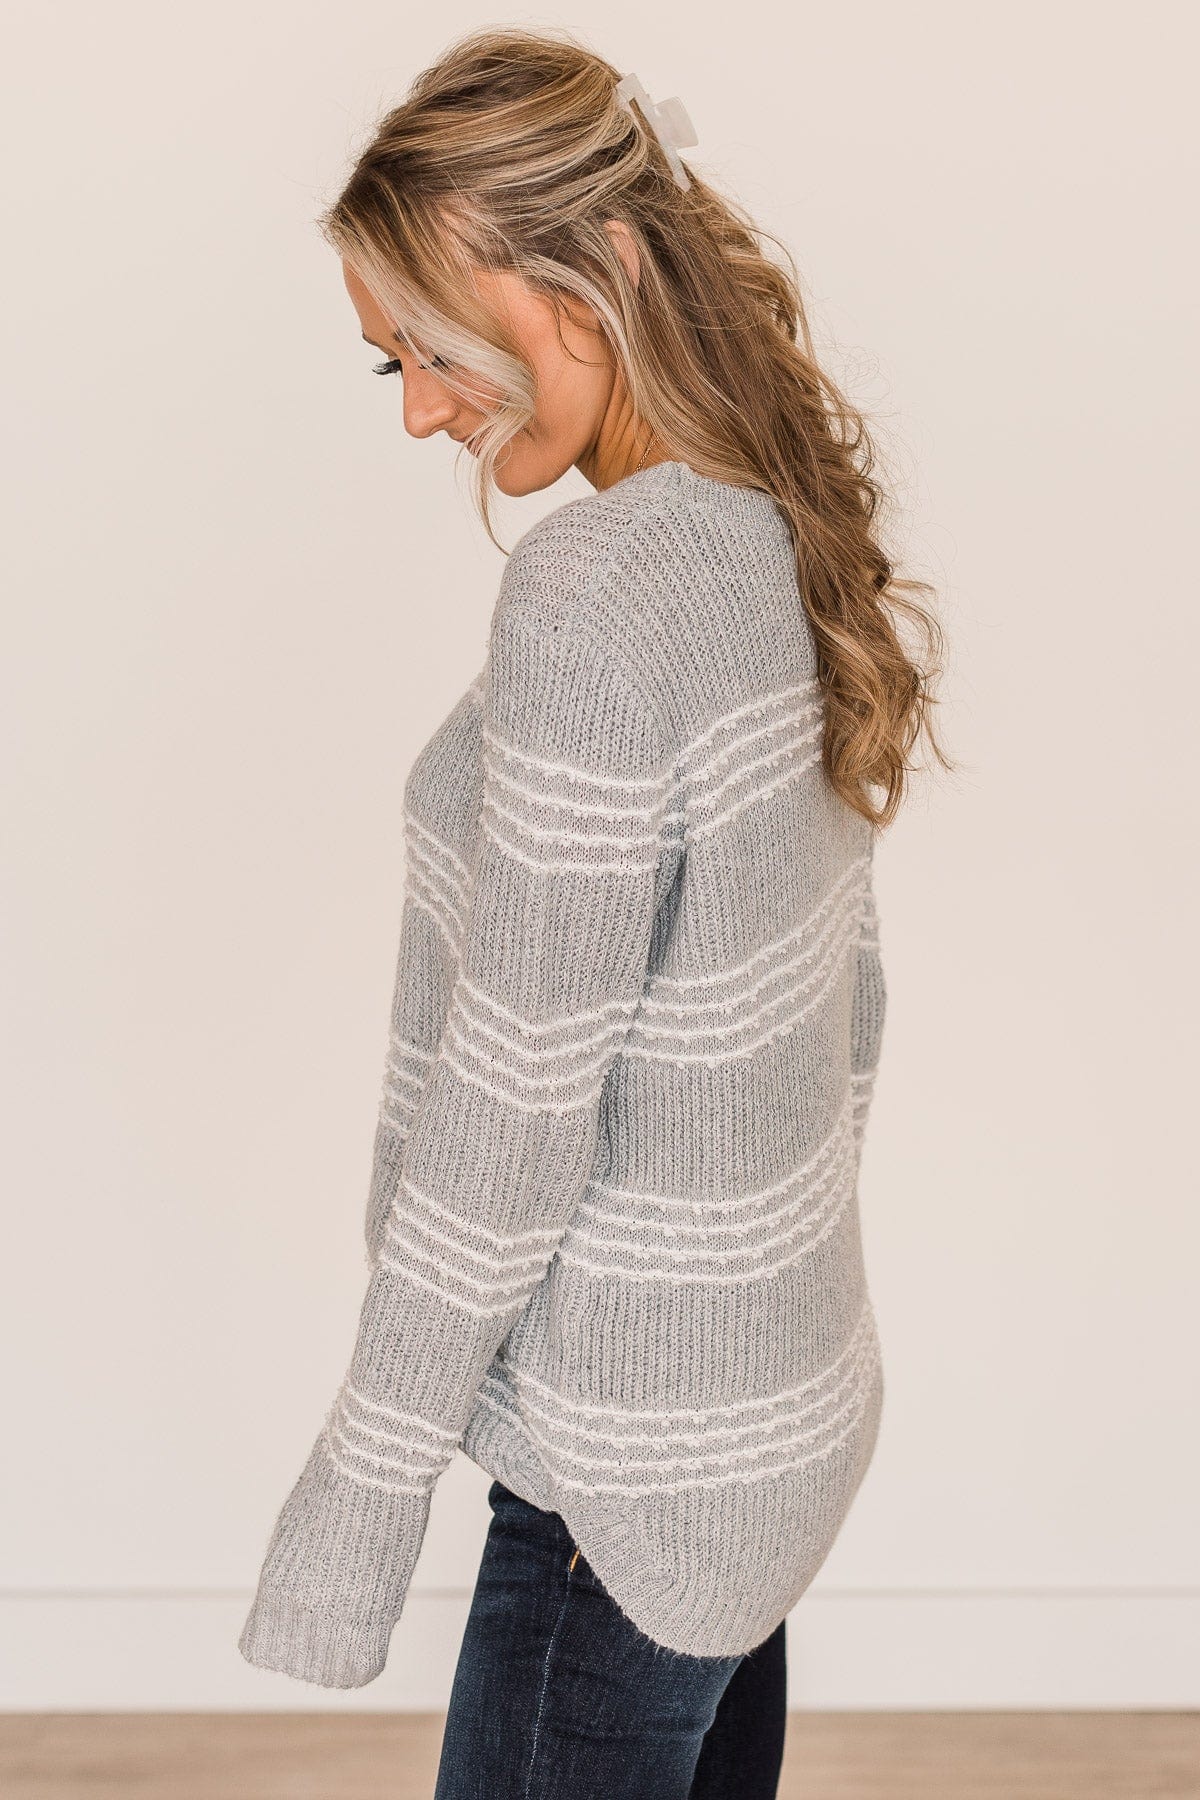 Meet Me There Striped Knit Sweater- Light Grey